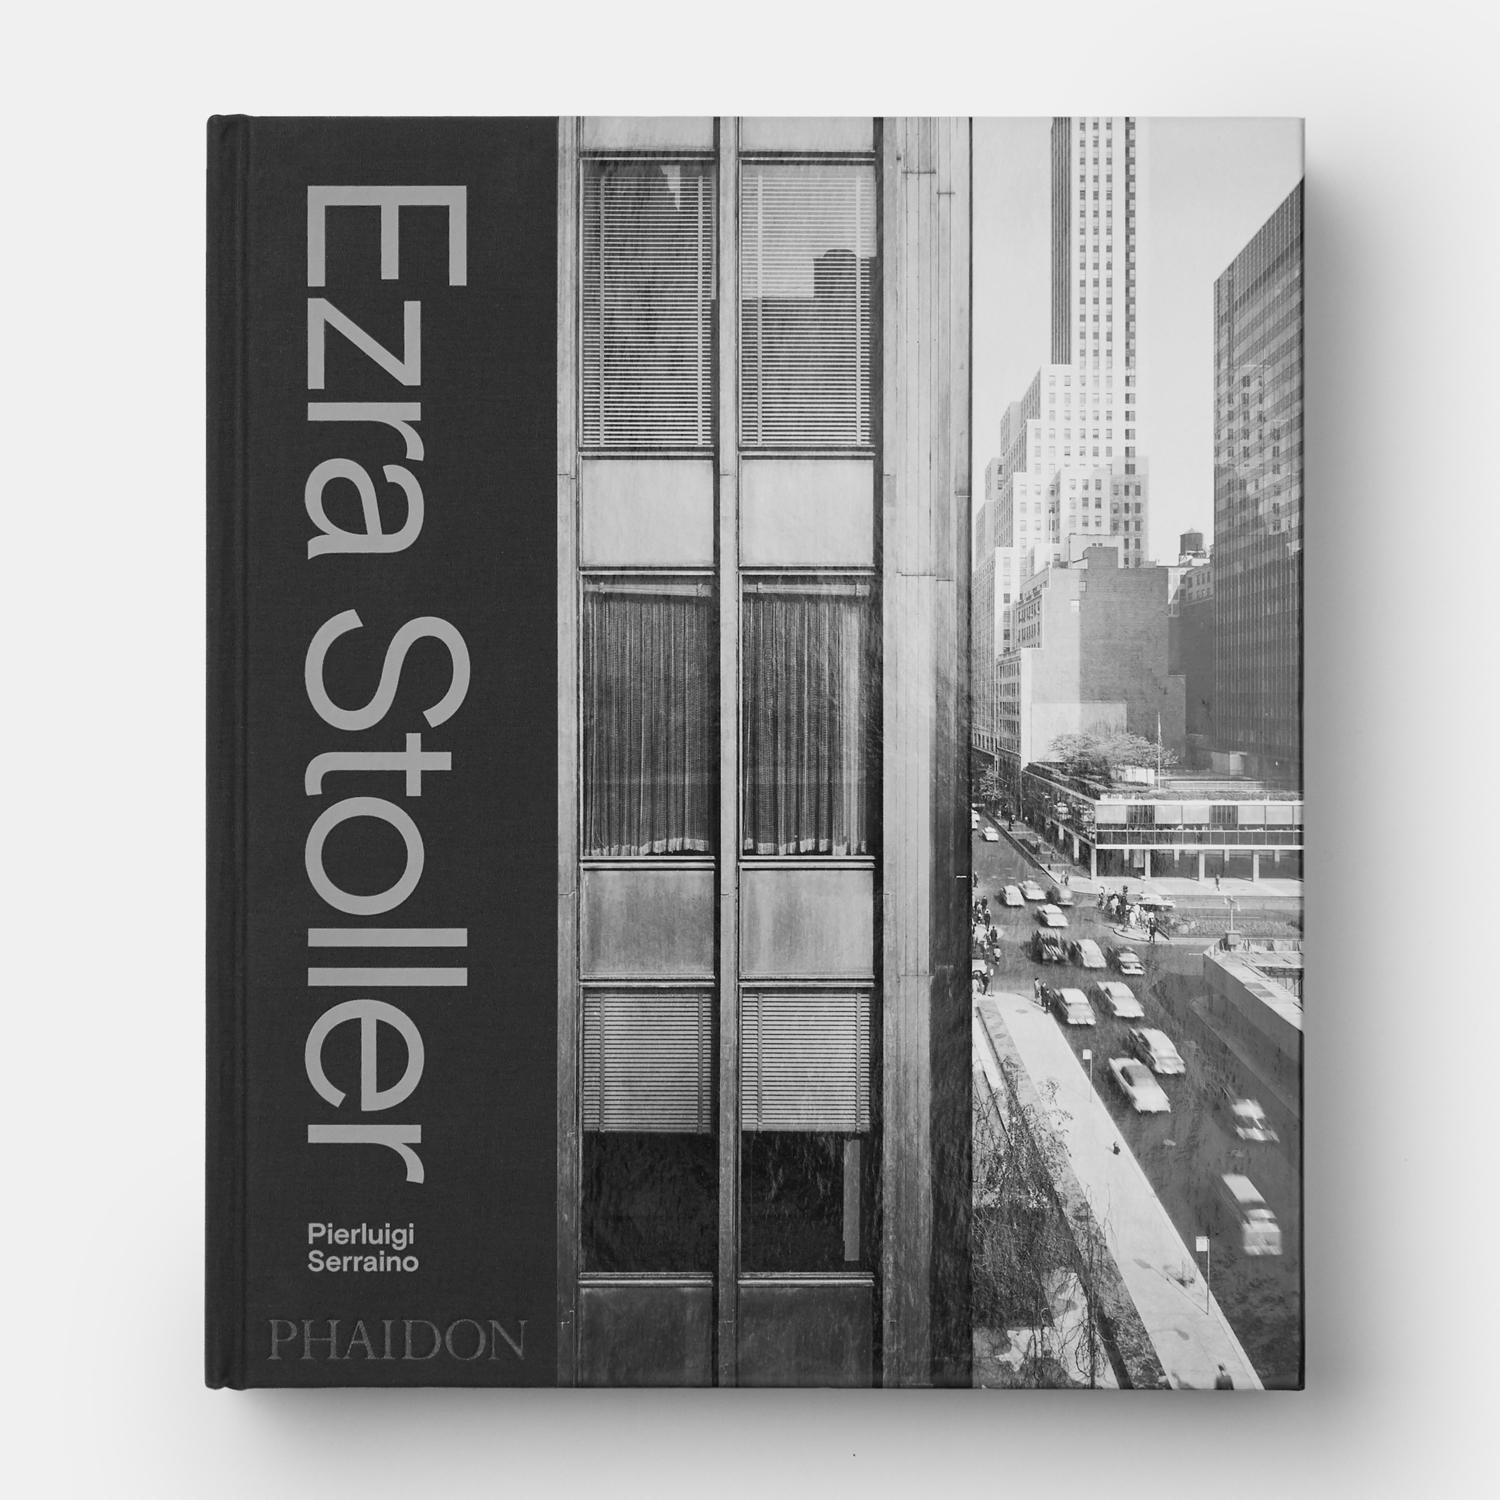 A captivating history of 20th century Modern American architecture, as seen through the eyes of a legendary photographer



It is impossible to overstate the importance of photography's role in shaping the world's perception of architecture. And